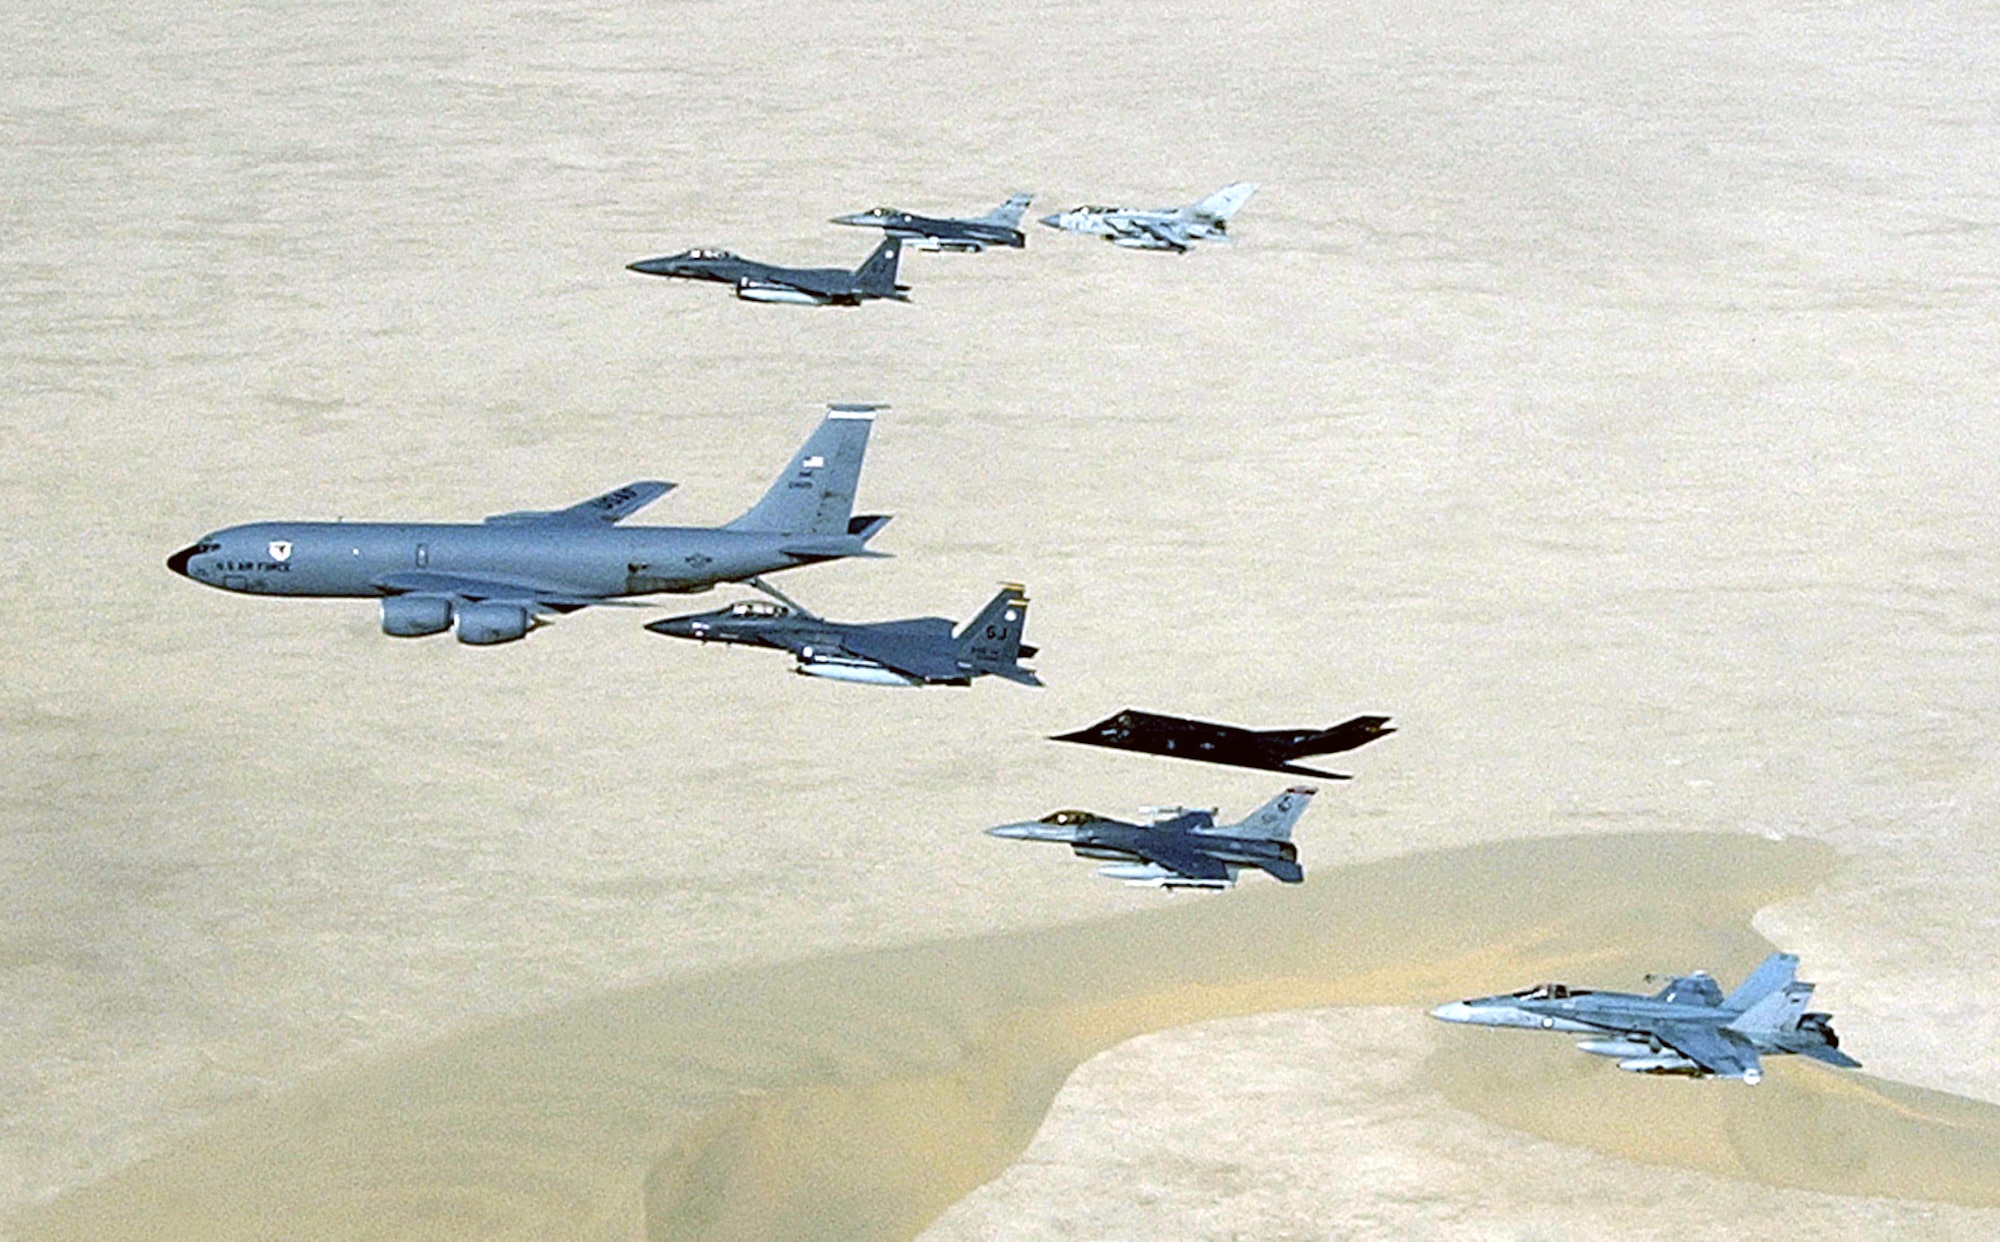 Aircraft of the 379th Air Expeditionary Wing and coalition counterparts fly over the desert in Southwest Asia on April 14, 2003. Aircraft include the KC-135 Stratotanker, F-15E Strike Eagle, F-117 Nighthawk, F-16 Fighting Falcon, British GR-4 Tornado and Australian F/A-18 Hornet. (U.S. Air Force photo/Master Sgt. Ron Przysucha)